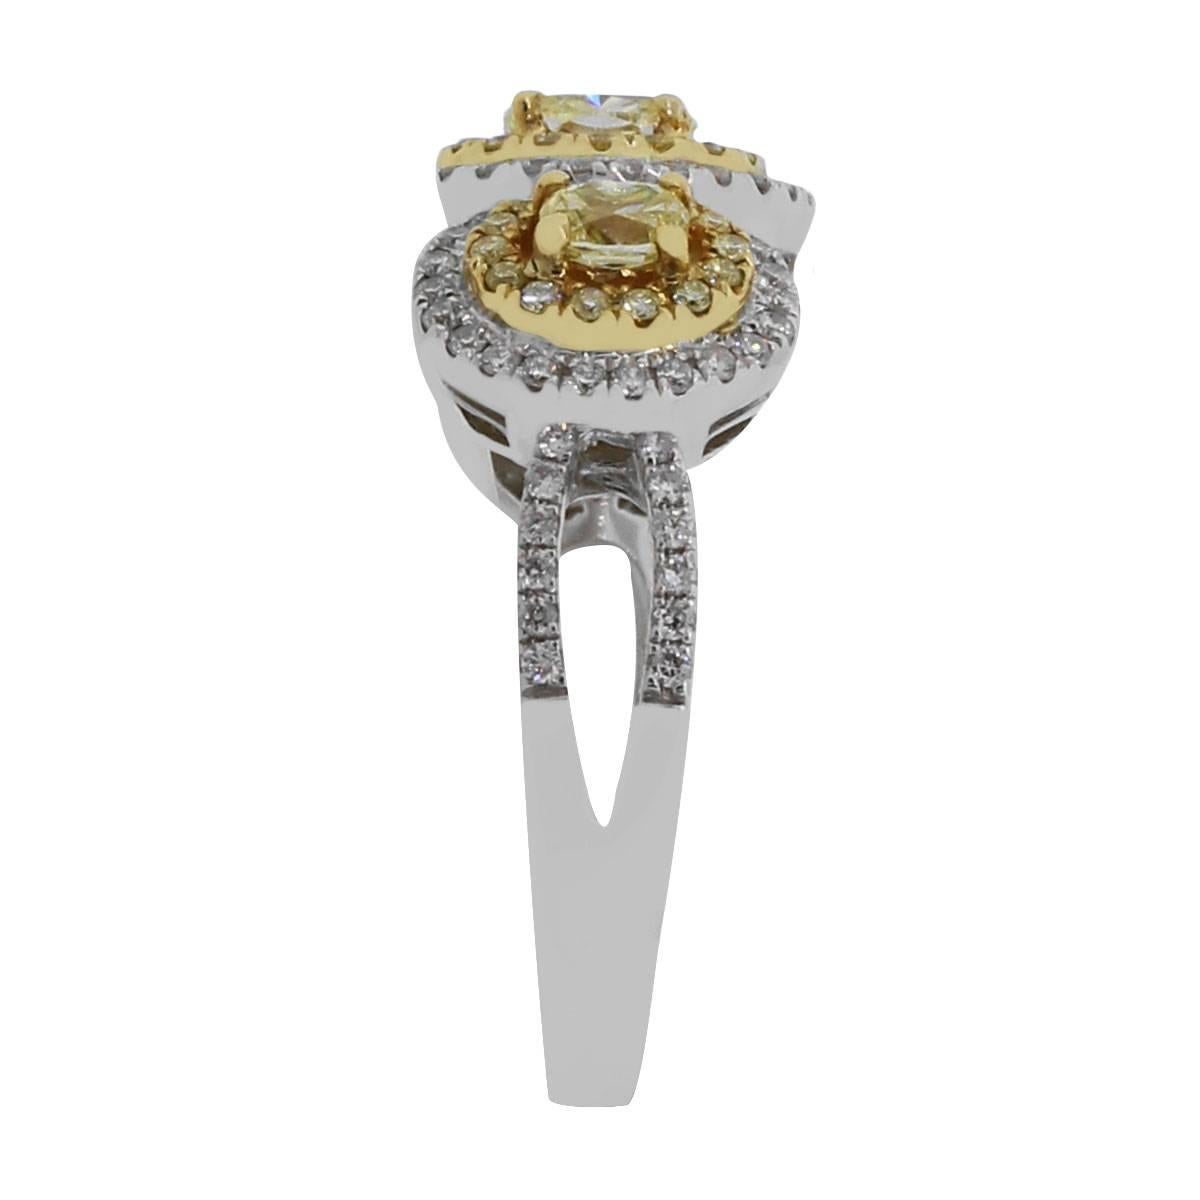 Material: 18k two tone gold
Diamond Details: Approximately 1.03ctw yellow diamonds and approximately 0.44ctw white diamonds. Diamonds are G/H in color and VS in clarity.
Size: 7
Total Weight: 7.6g (4.9dwt)
Measurements: 0.80″ x 0.45″ x 1.10″
SKU: